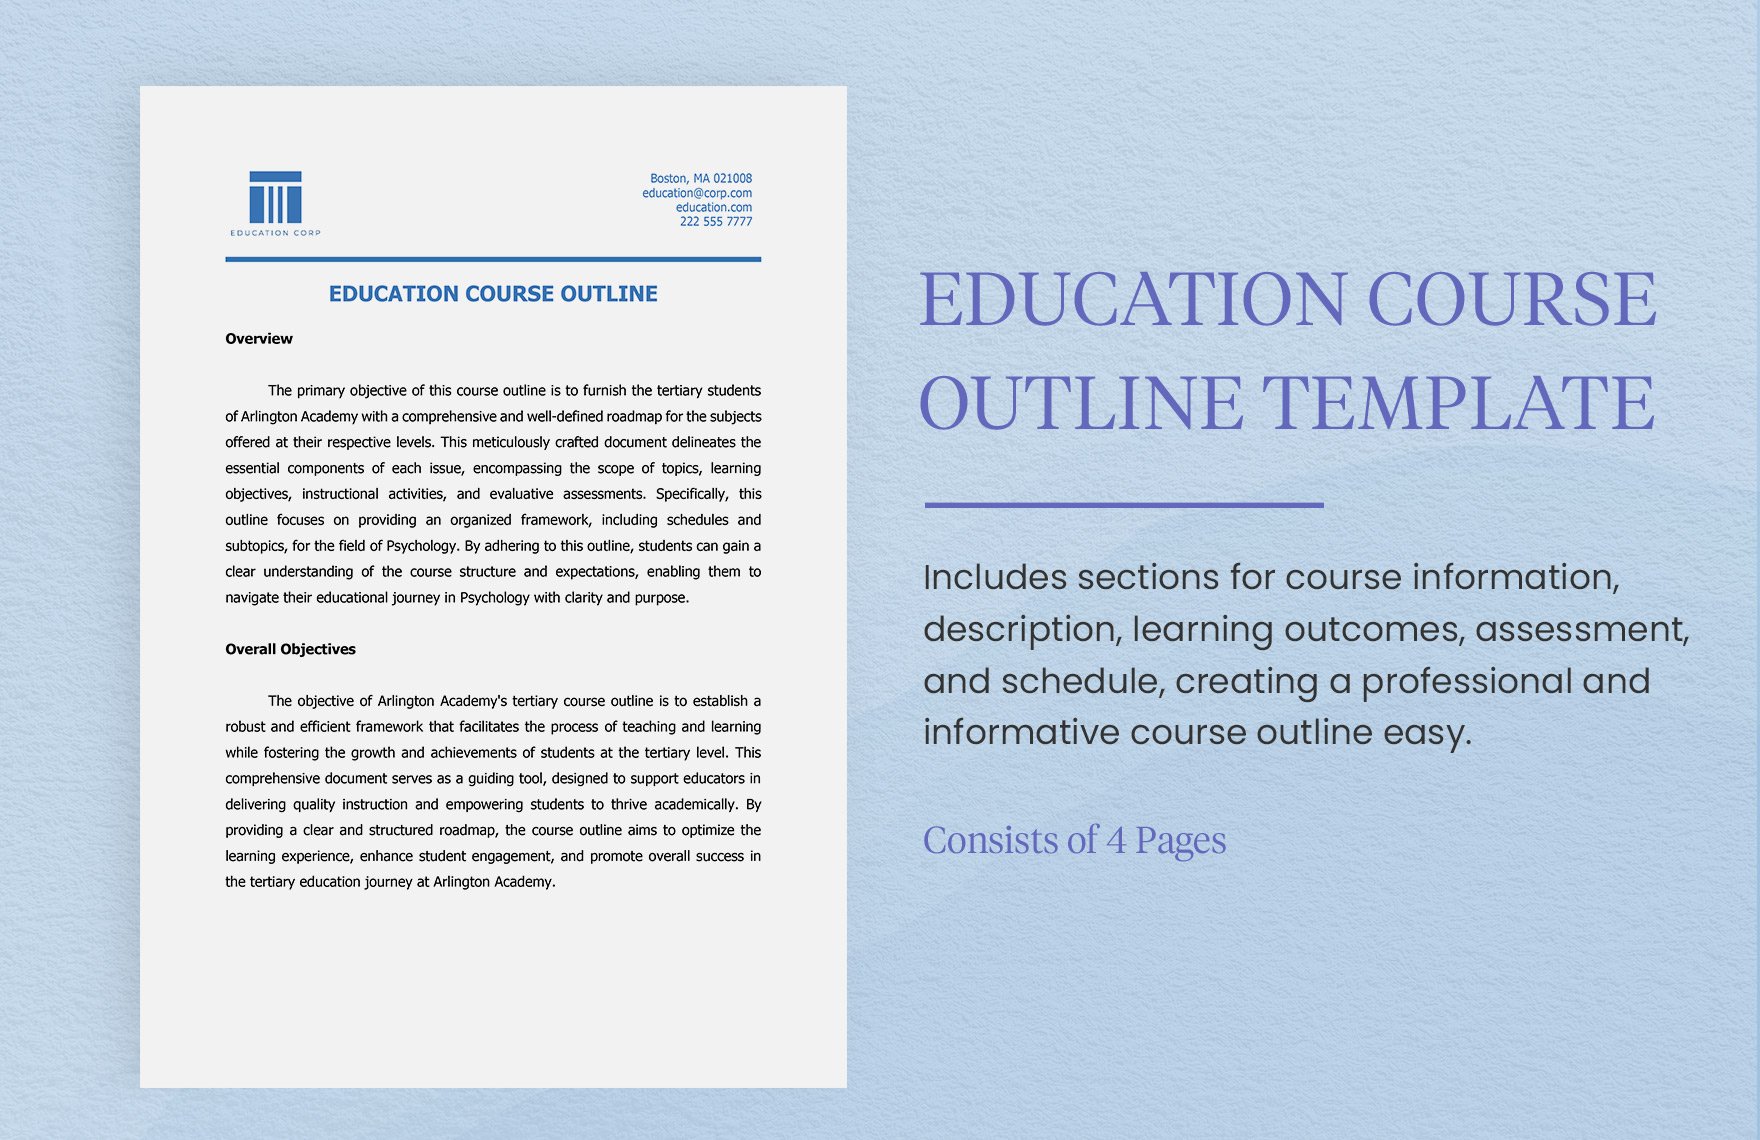 Education Course Outline Template in Word, Google Docs